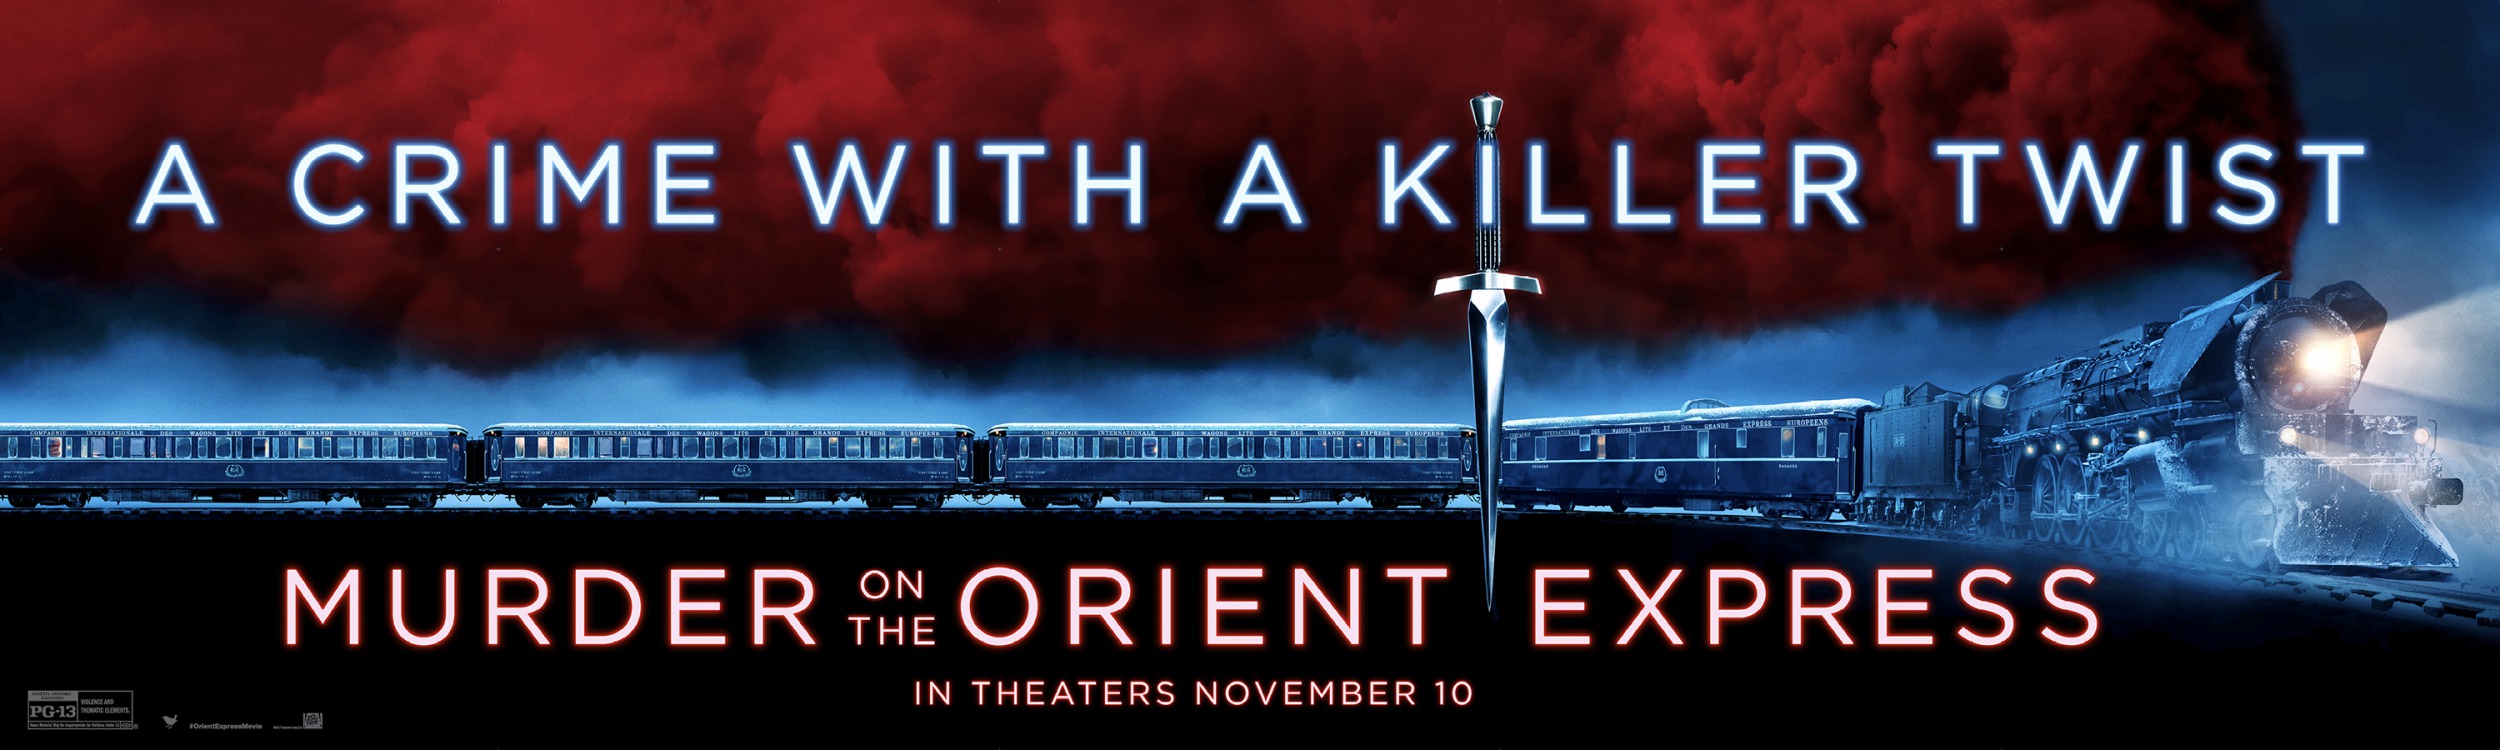 Mega Sized Movie Poster Image for Murder on the Orient Express (#20 of 40)